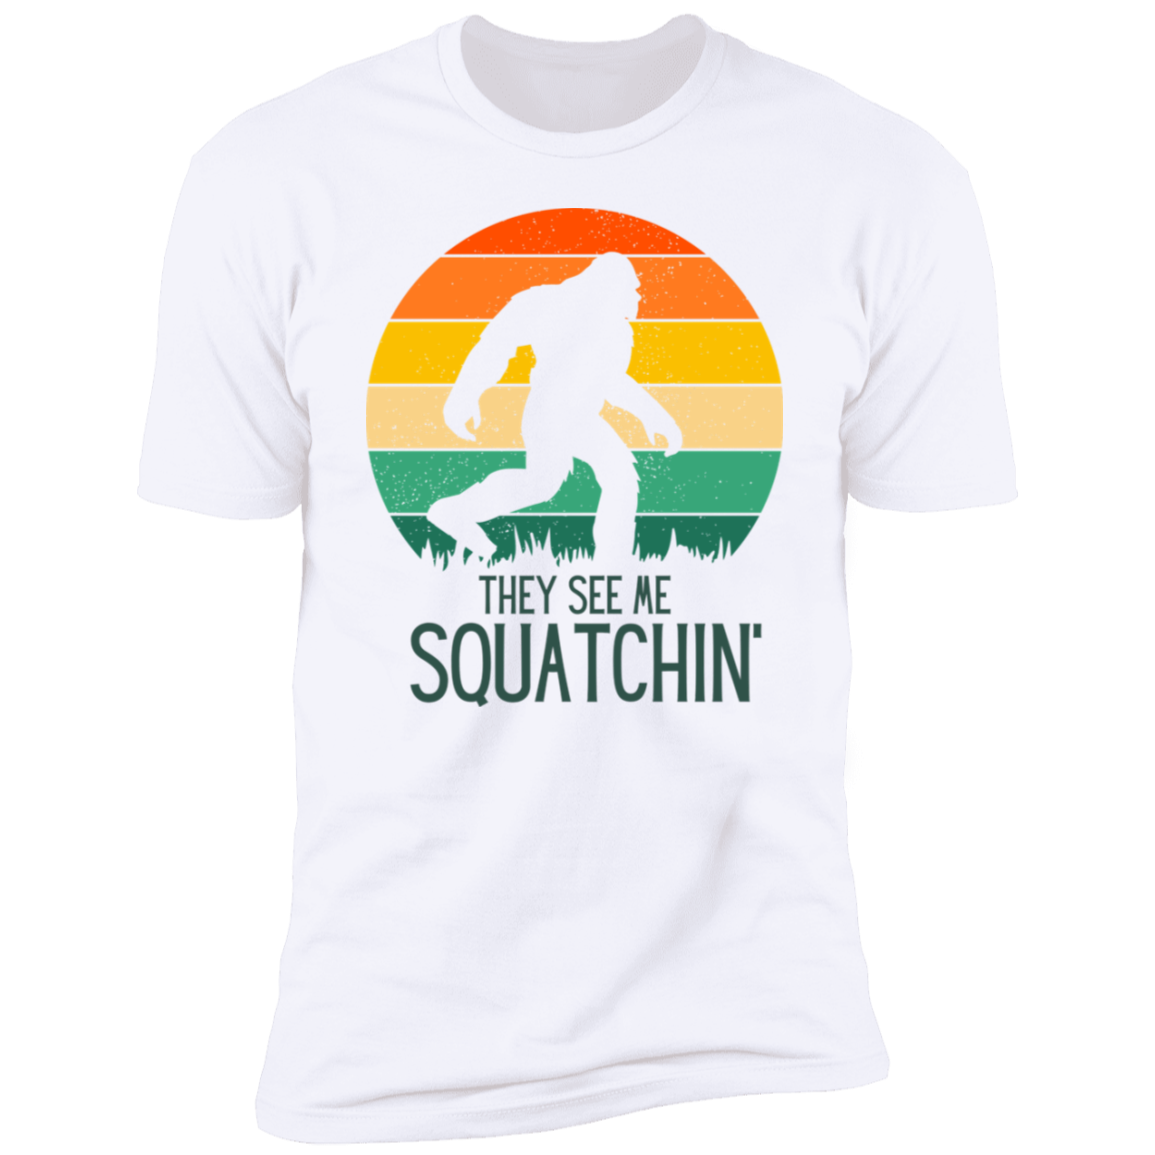 They see me Squatchin' T-Shirt